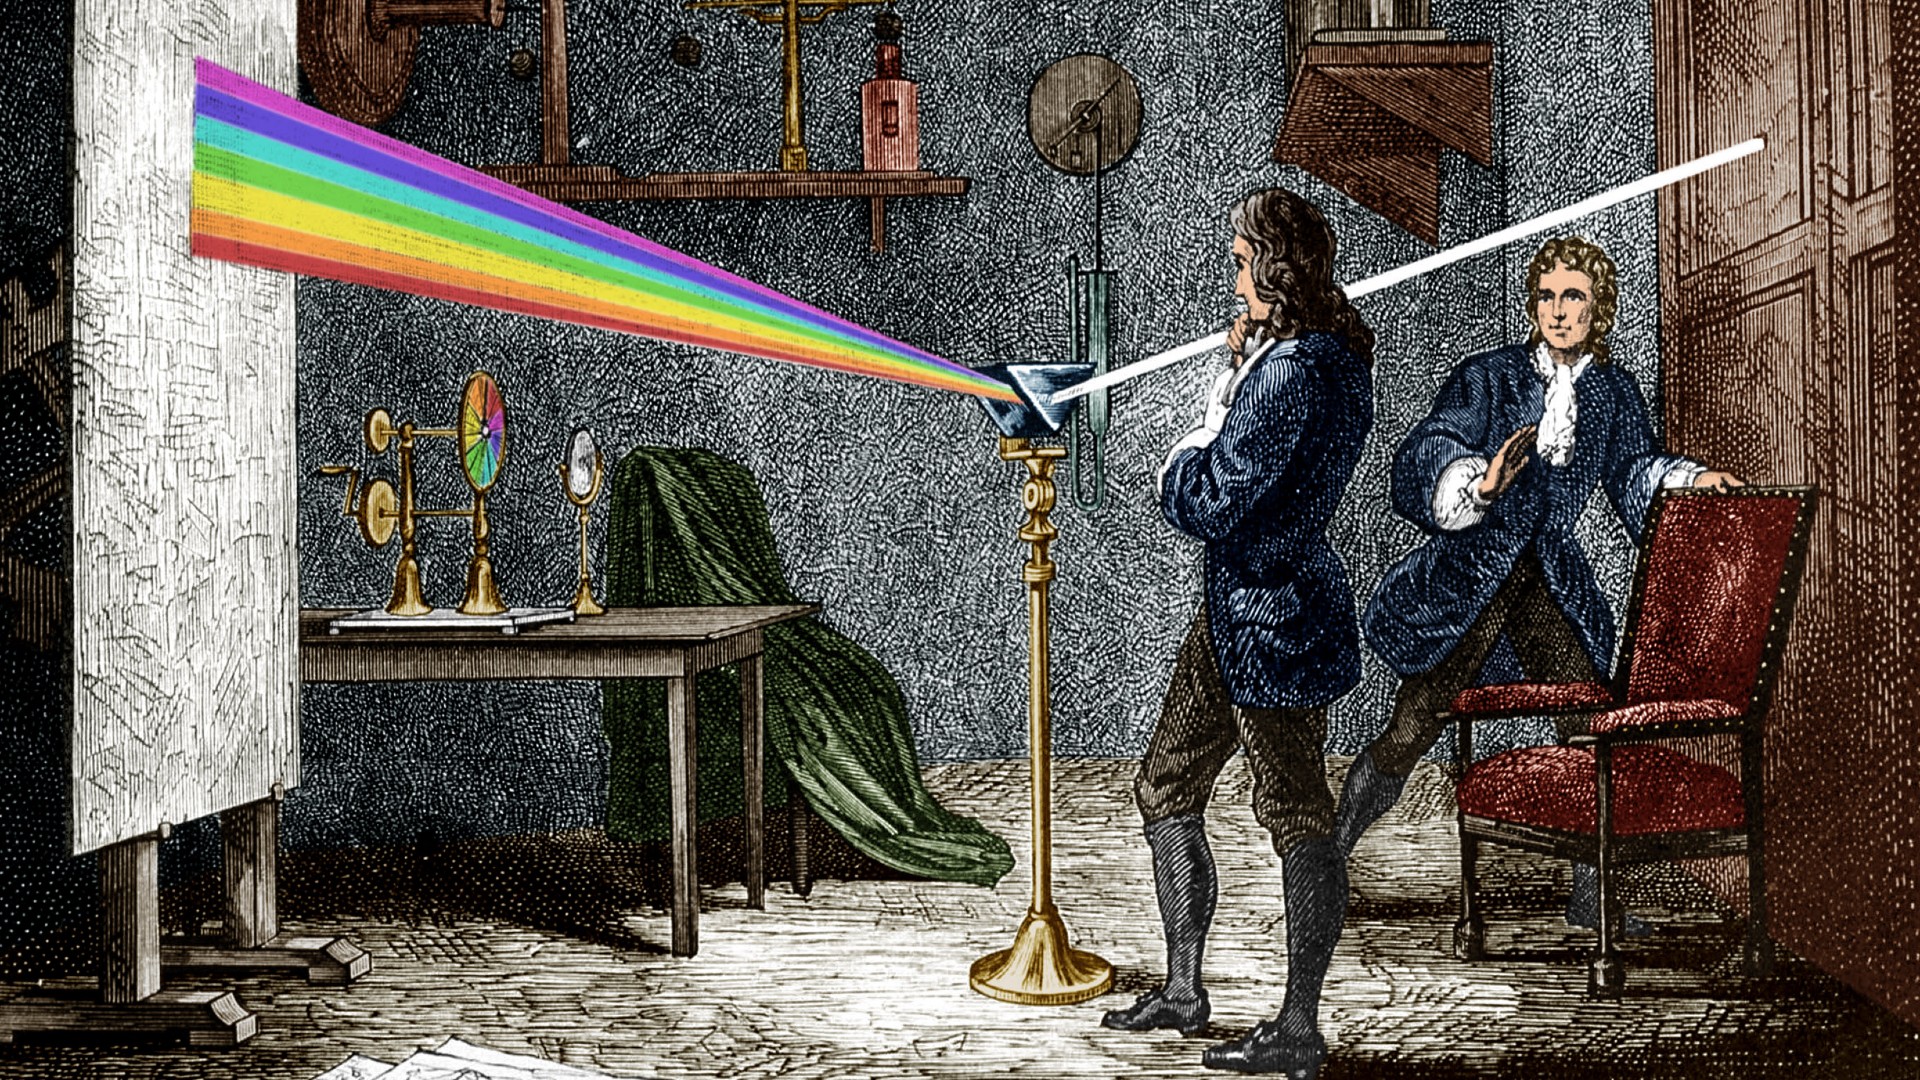 Isaac Newton experimenting with a prism and light